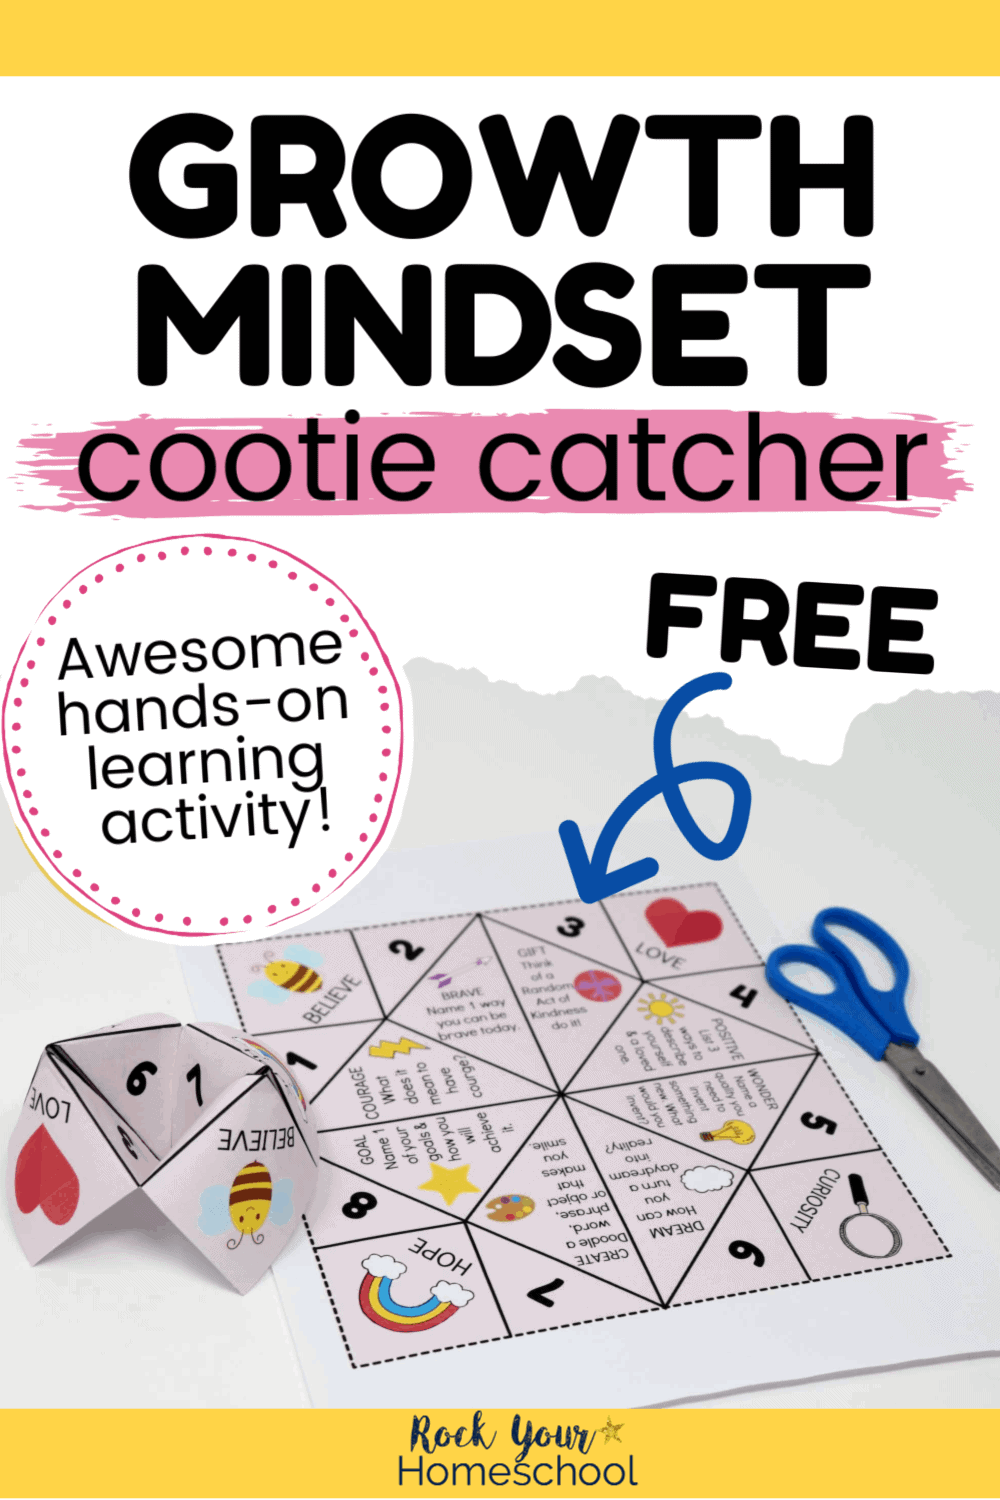 Growth Mindset Fun with 2 Free Printable Cootie Catchers